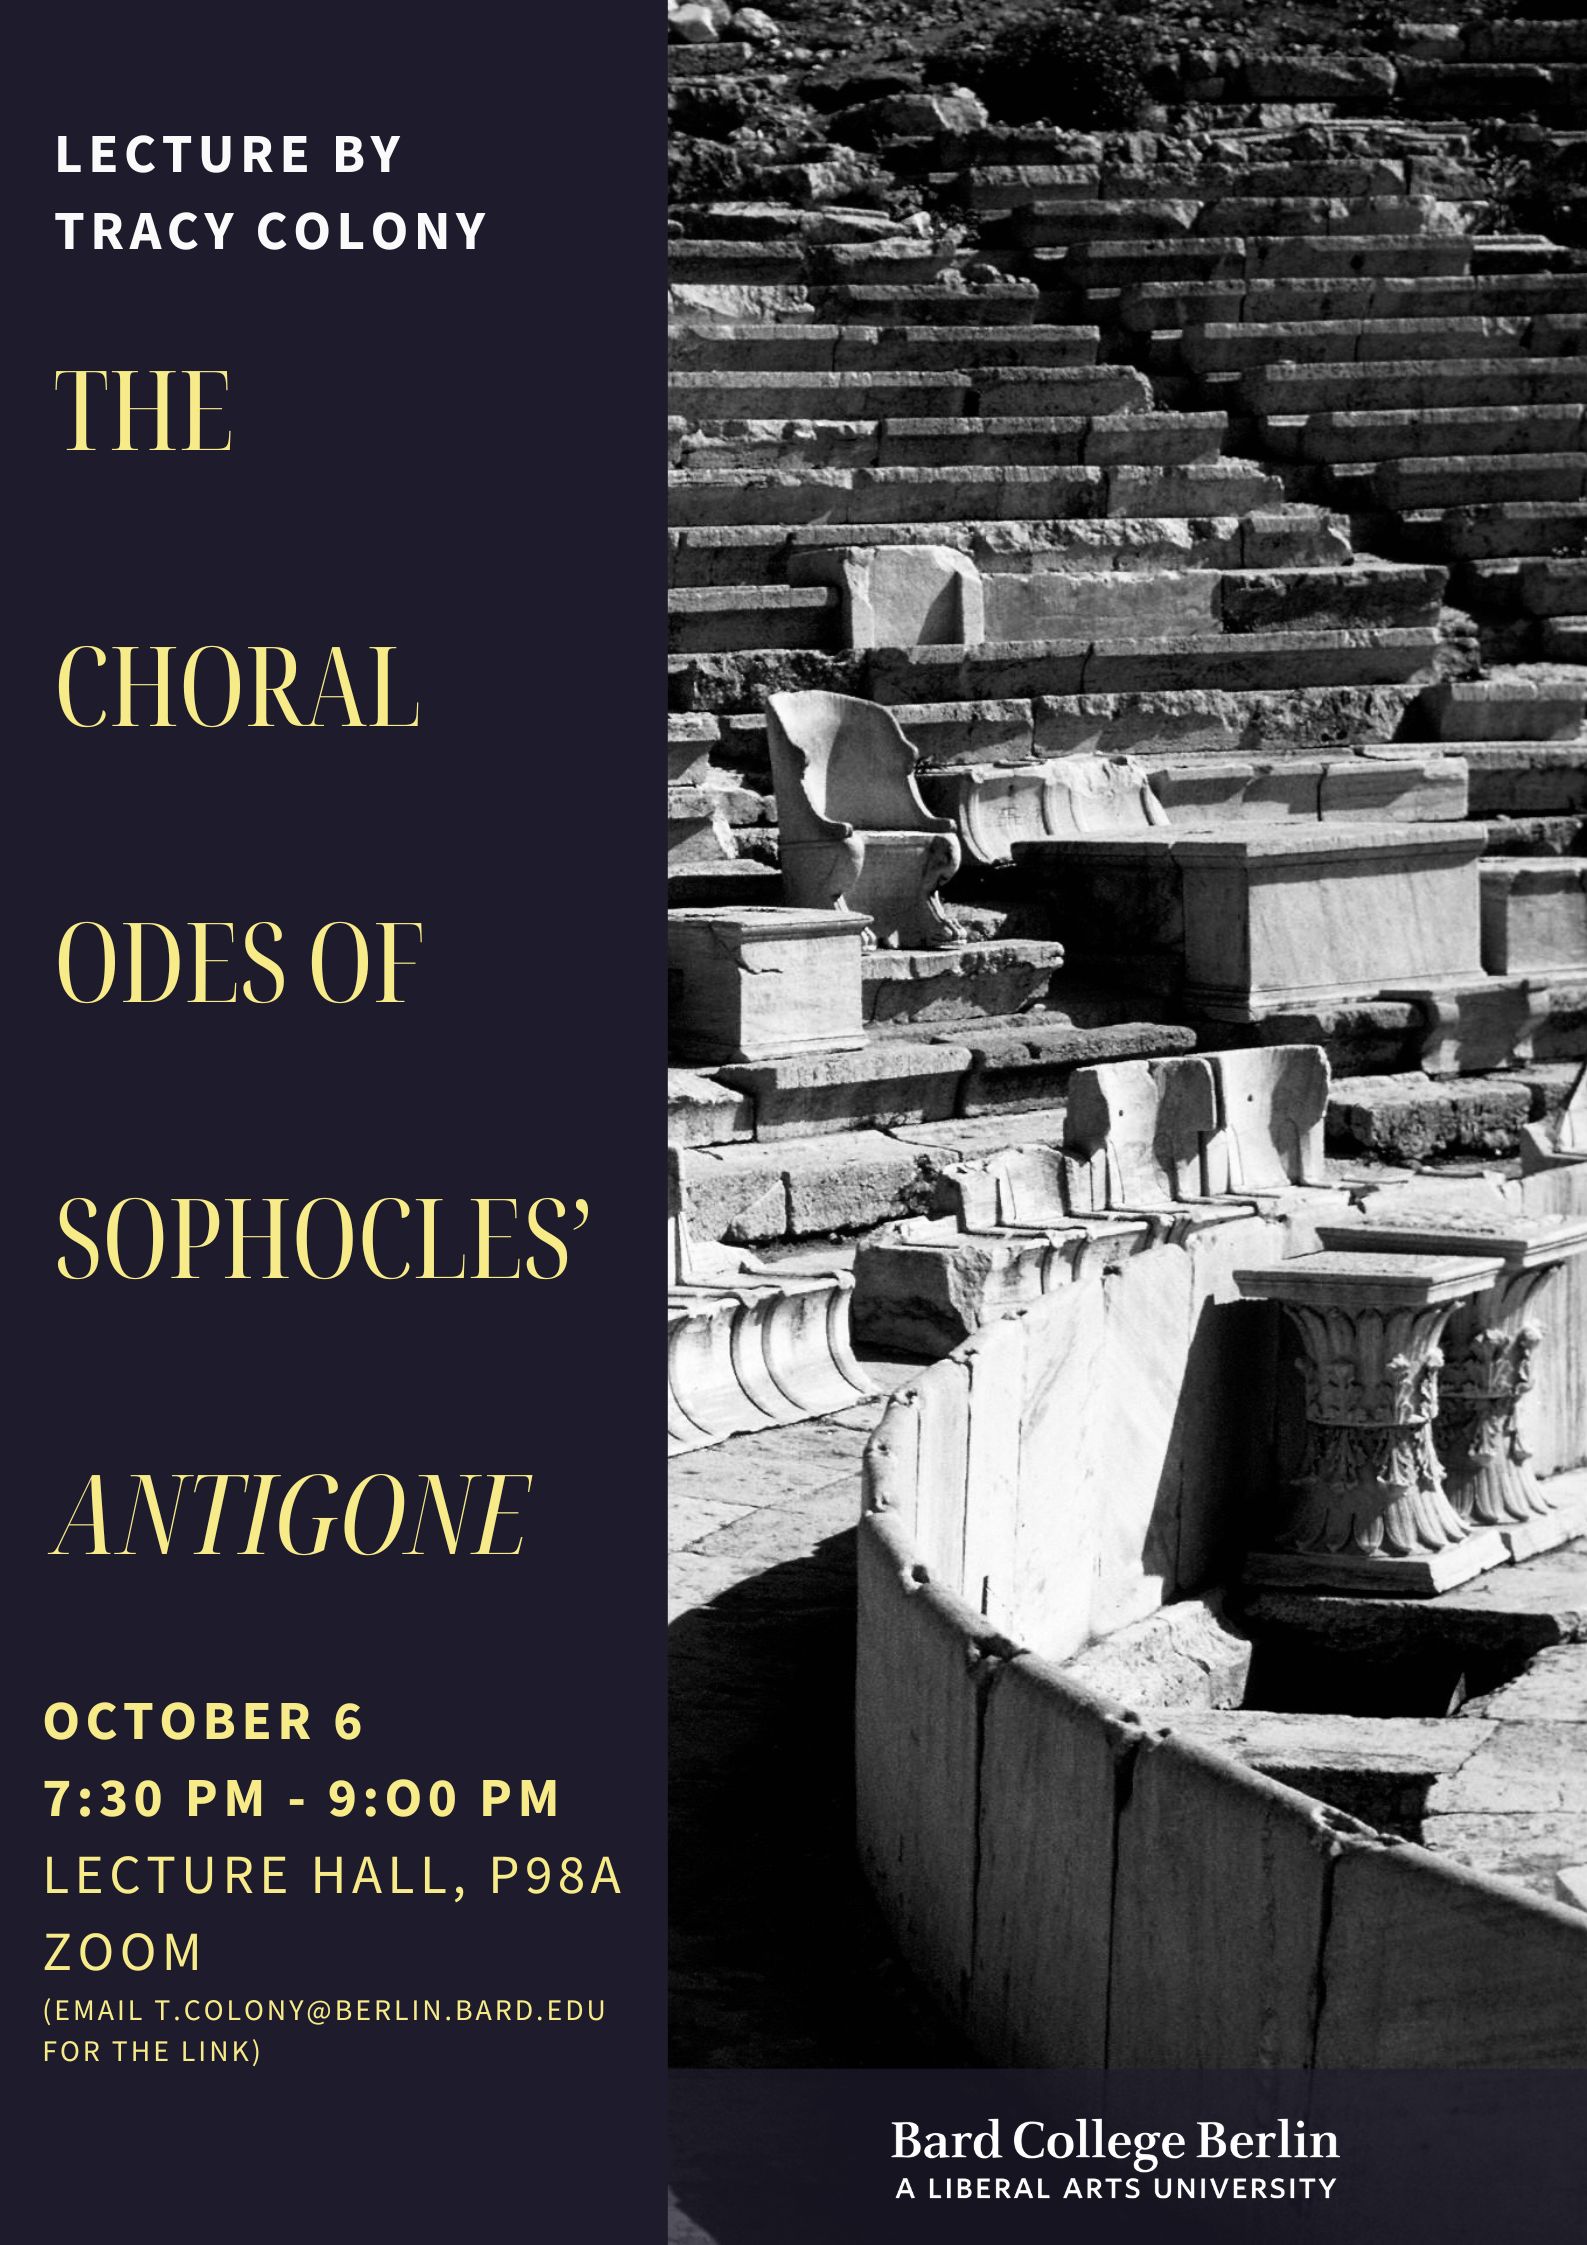 The Choral Odes of Sophocles&rsquo; Antigone